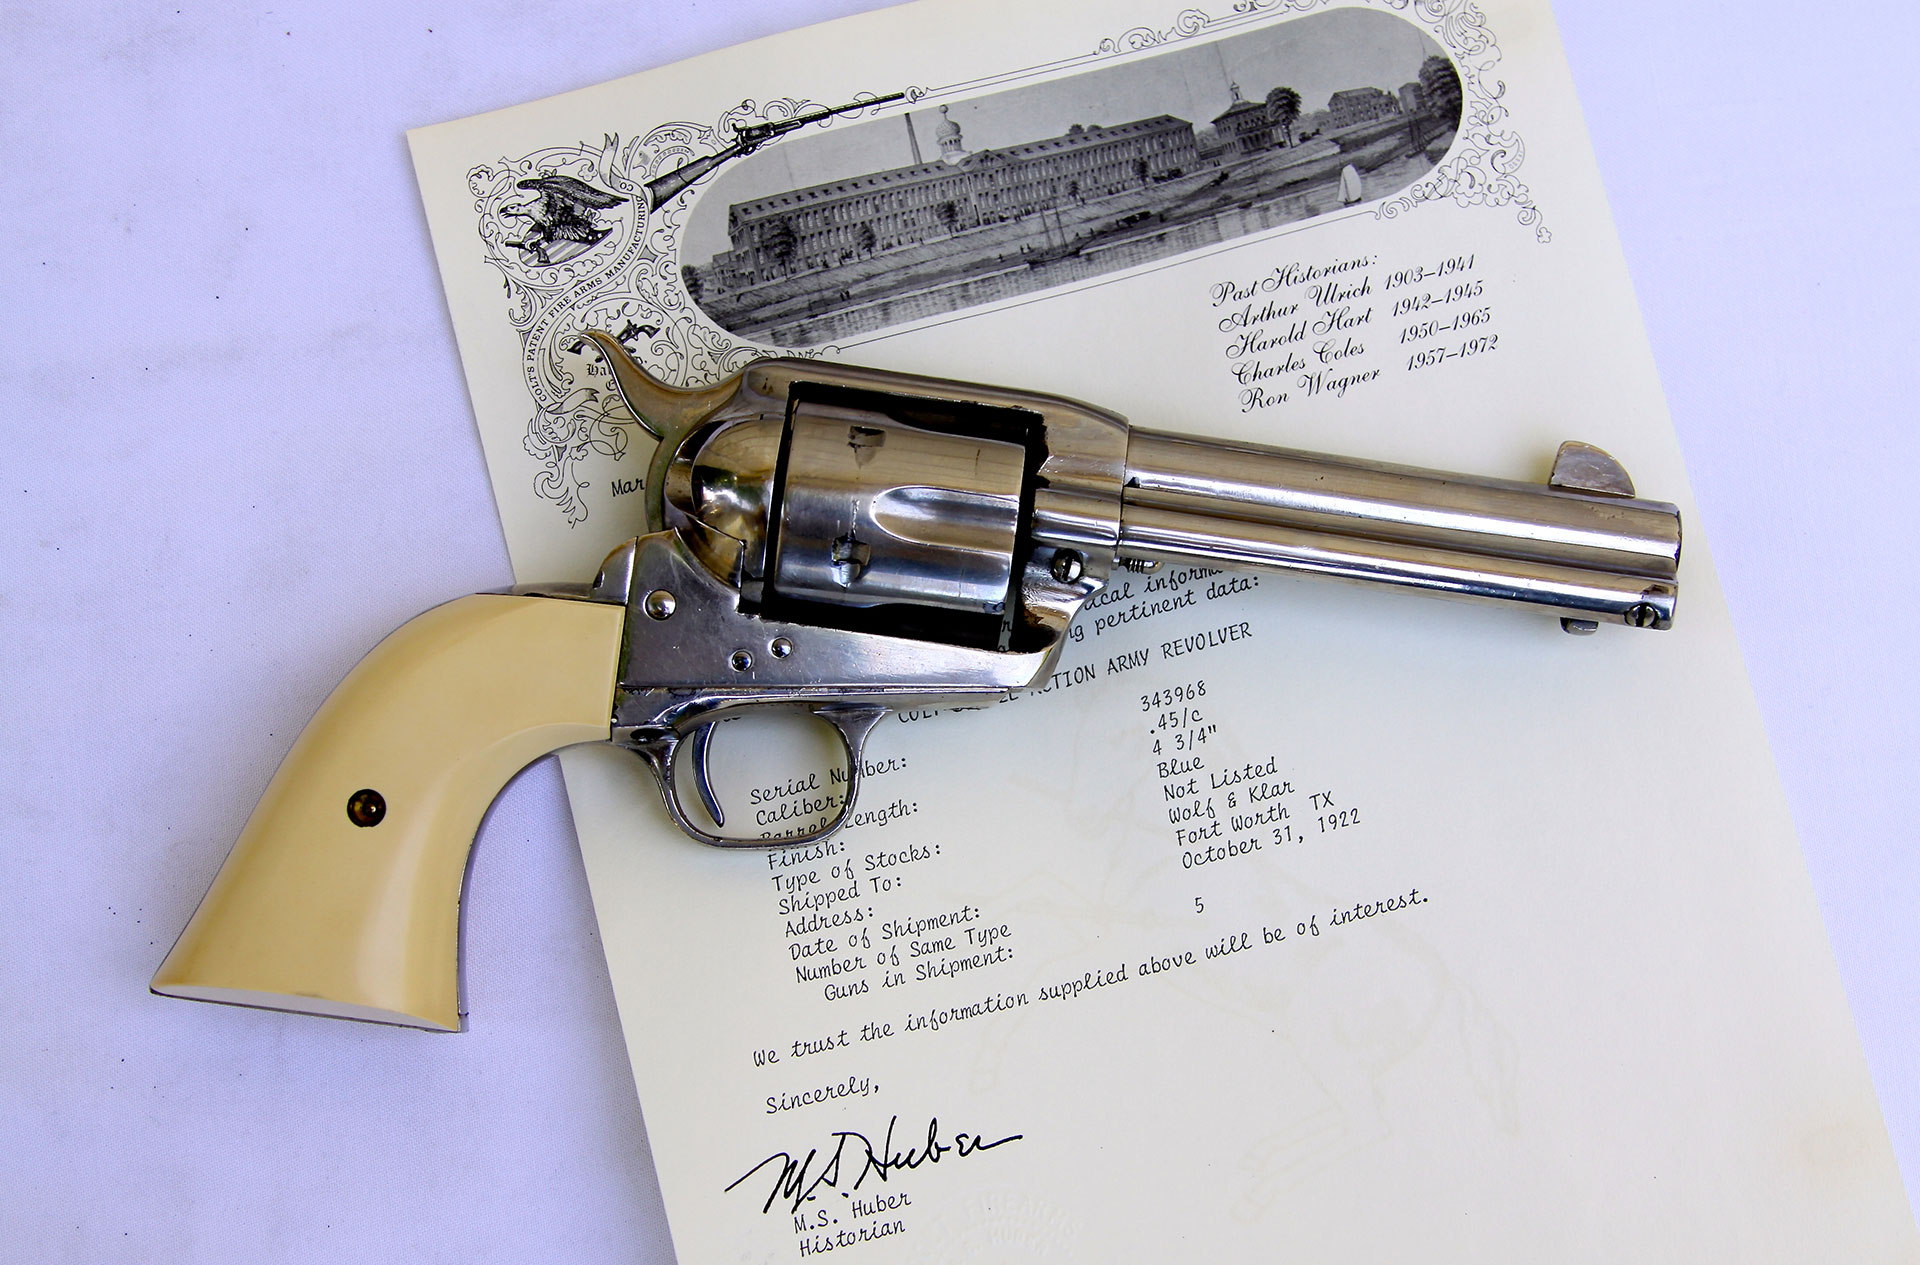 On October 31st, 1922, this .45 caliber Colt Single Action Army was sent to Wolf & Klar. Originally blued and case hardened, the gun sports an old nickel refinish and non-original grips, but still maintains its Texas cowboy allure.